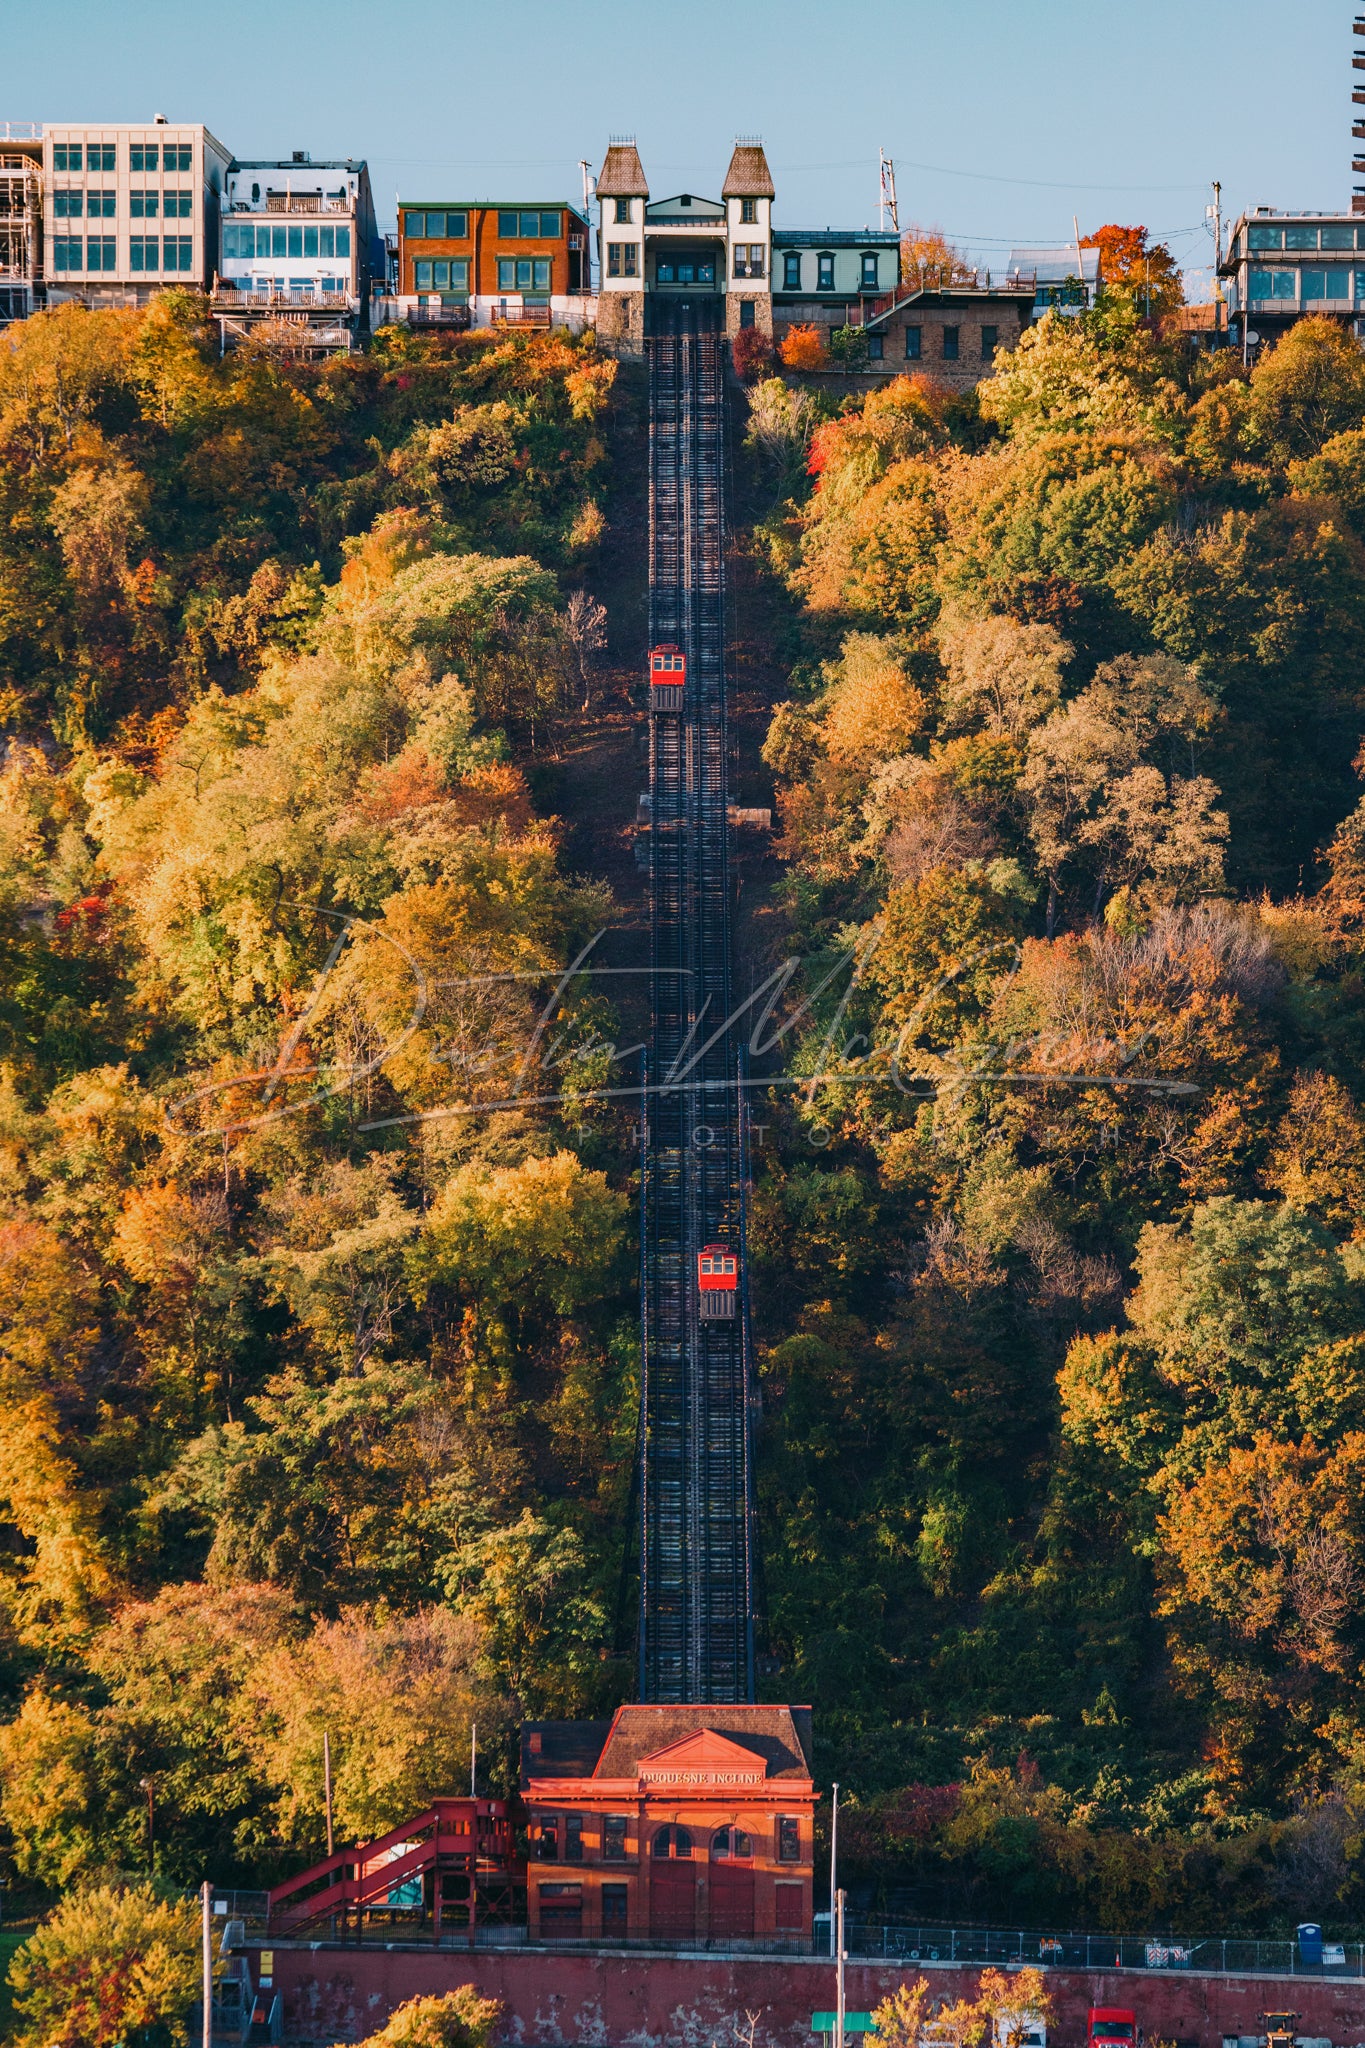 The Duquesne Incline in Fall